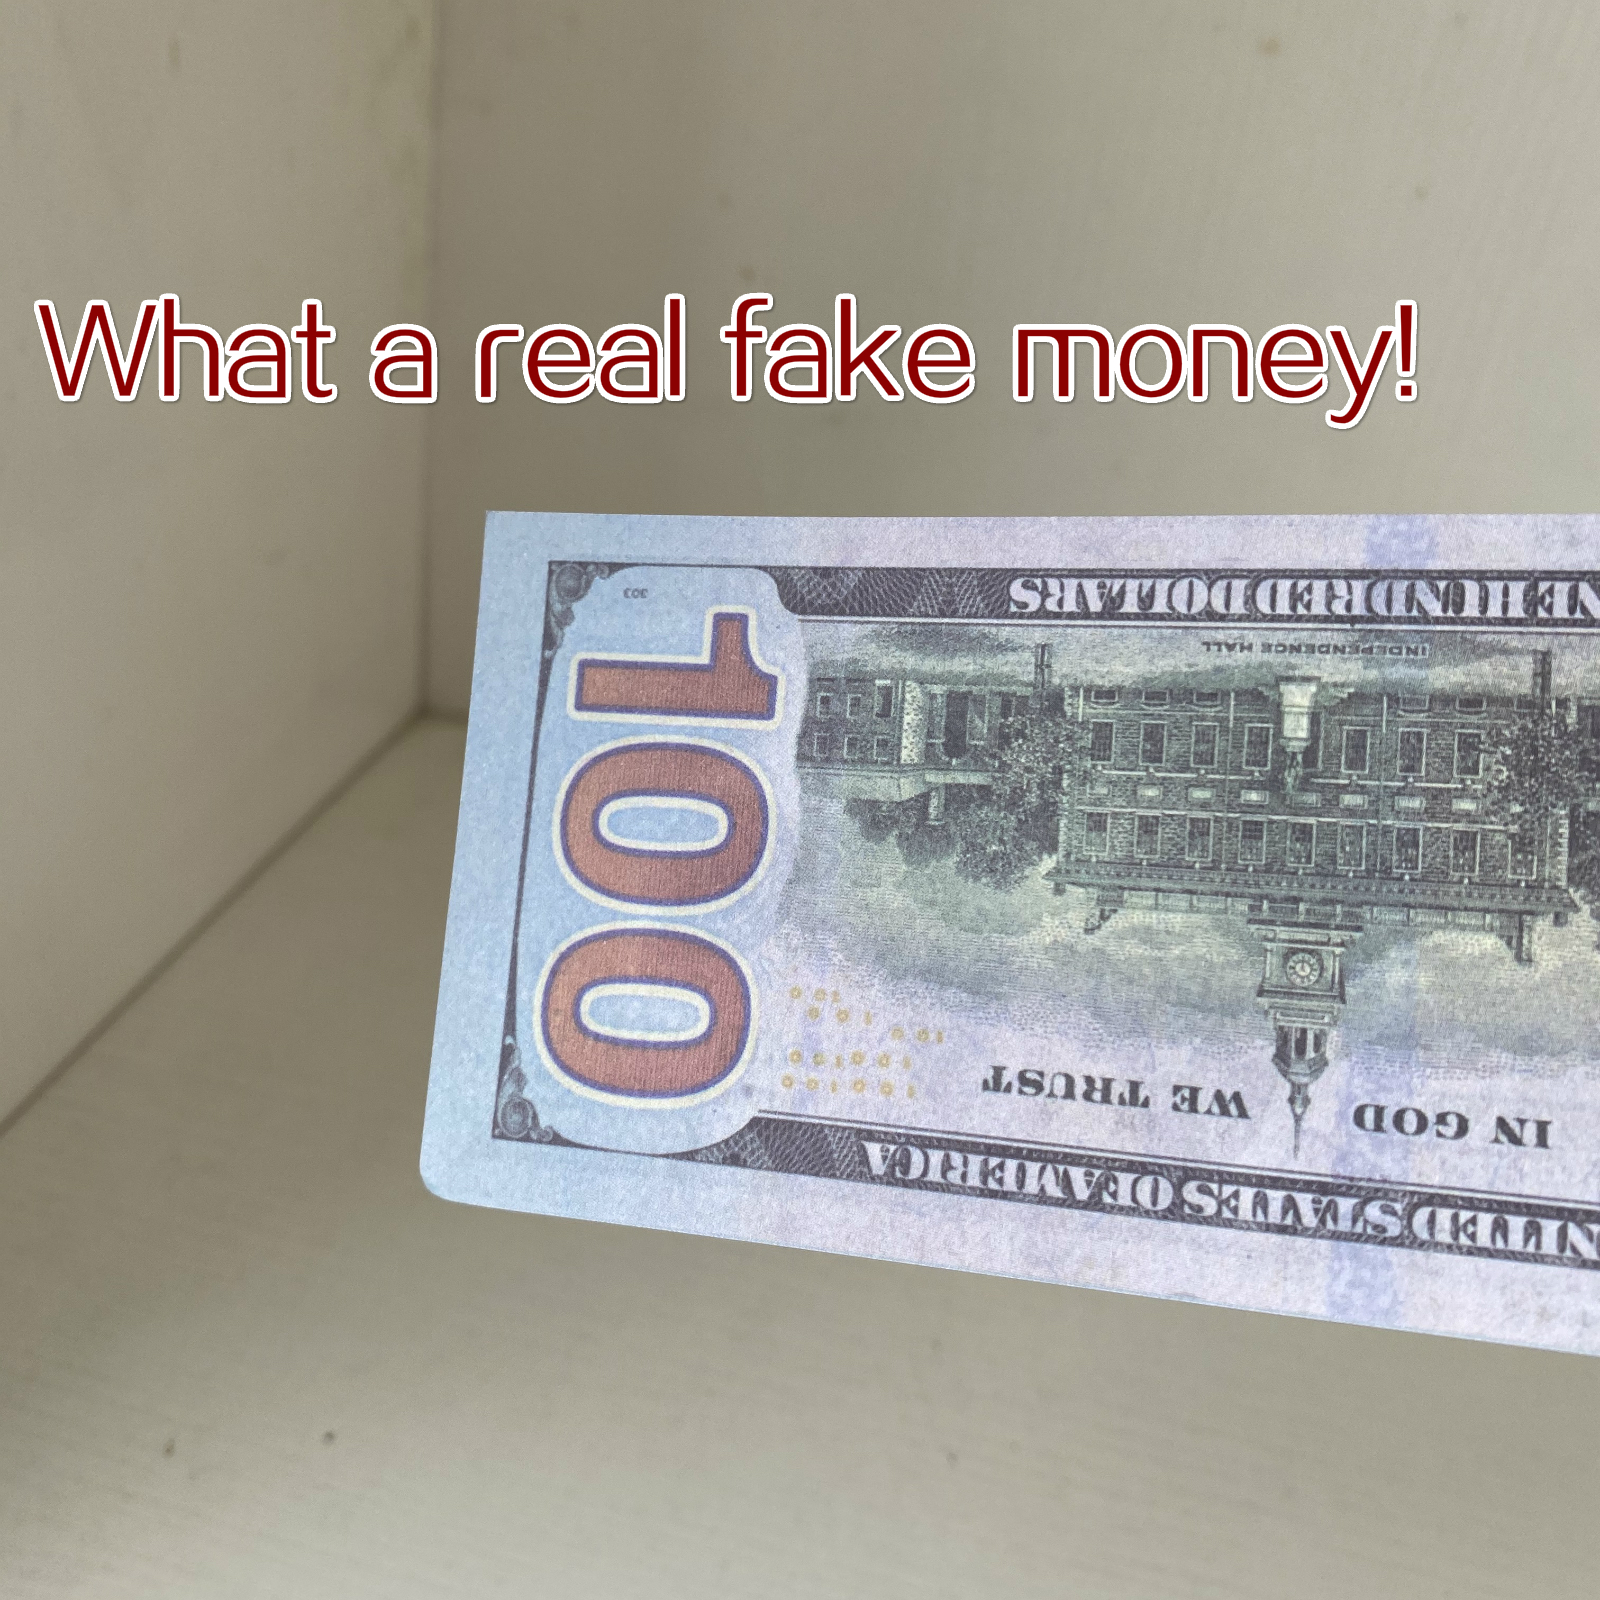 

Old Dollars American 100 Dollar Fake Money Movies Prop New Dollars Bank Note Counting Prop Money Festive Party Games Toys Collections Gifts